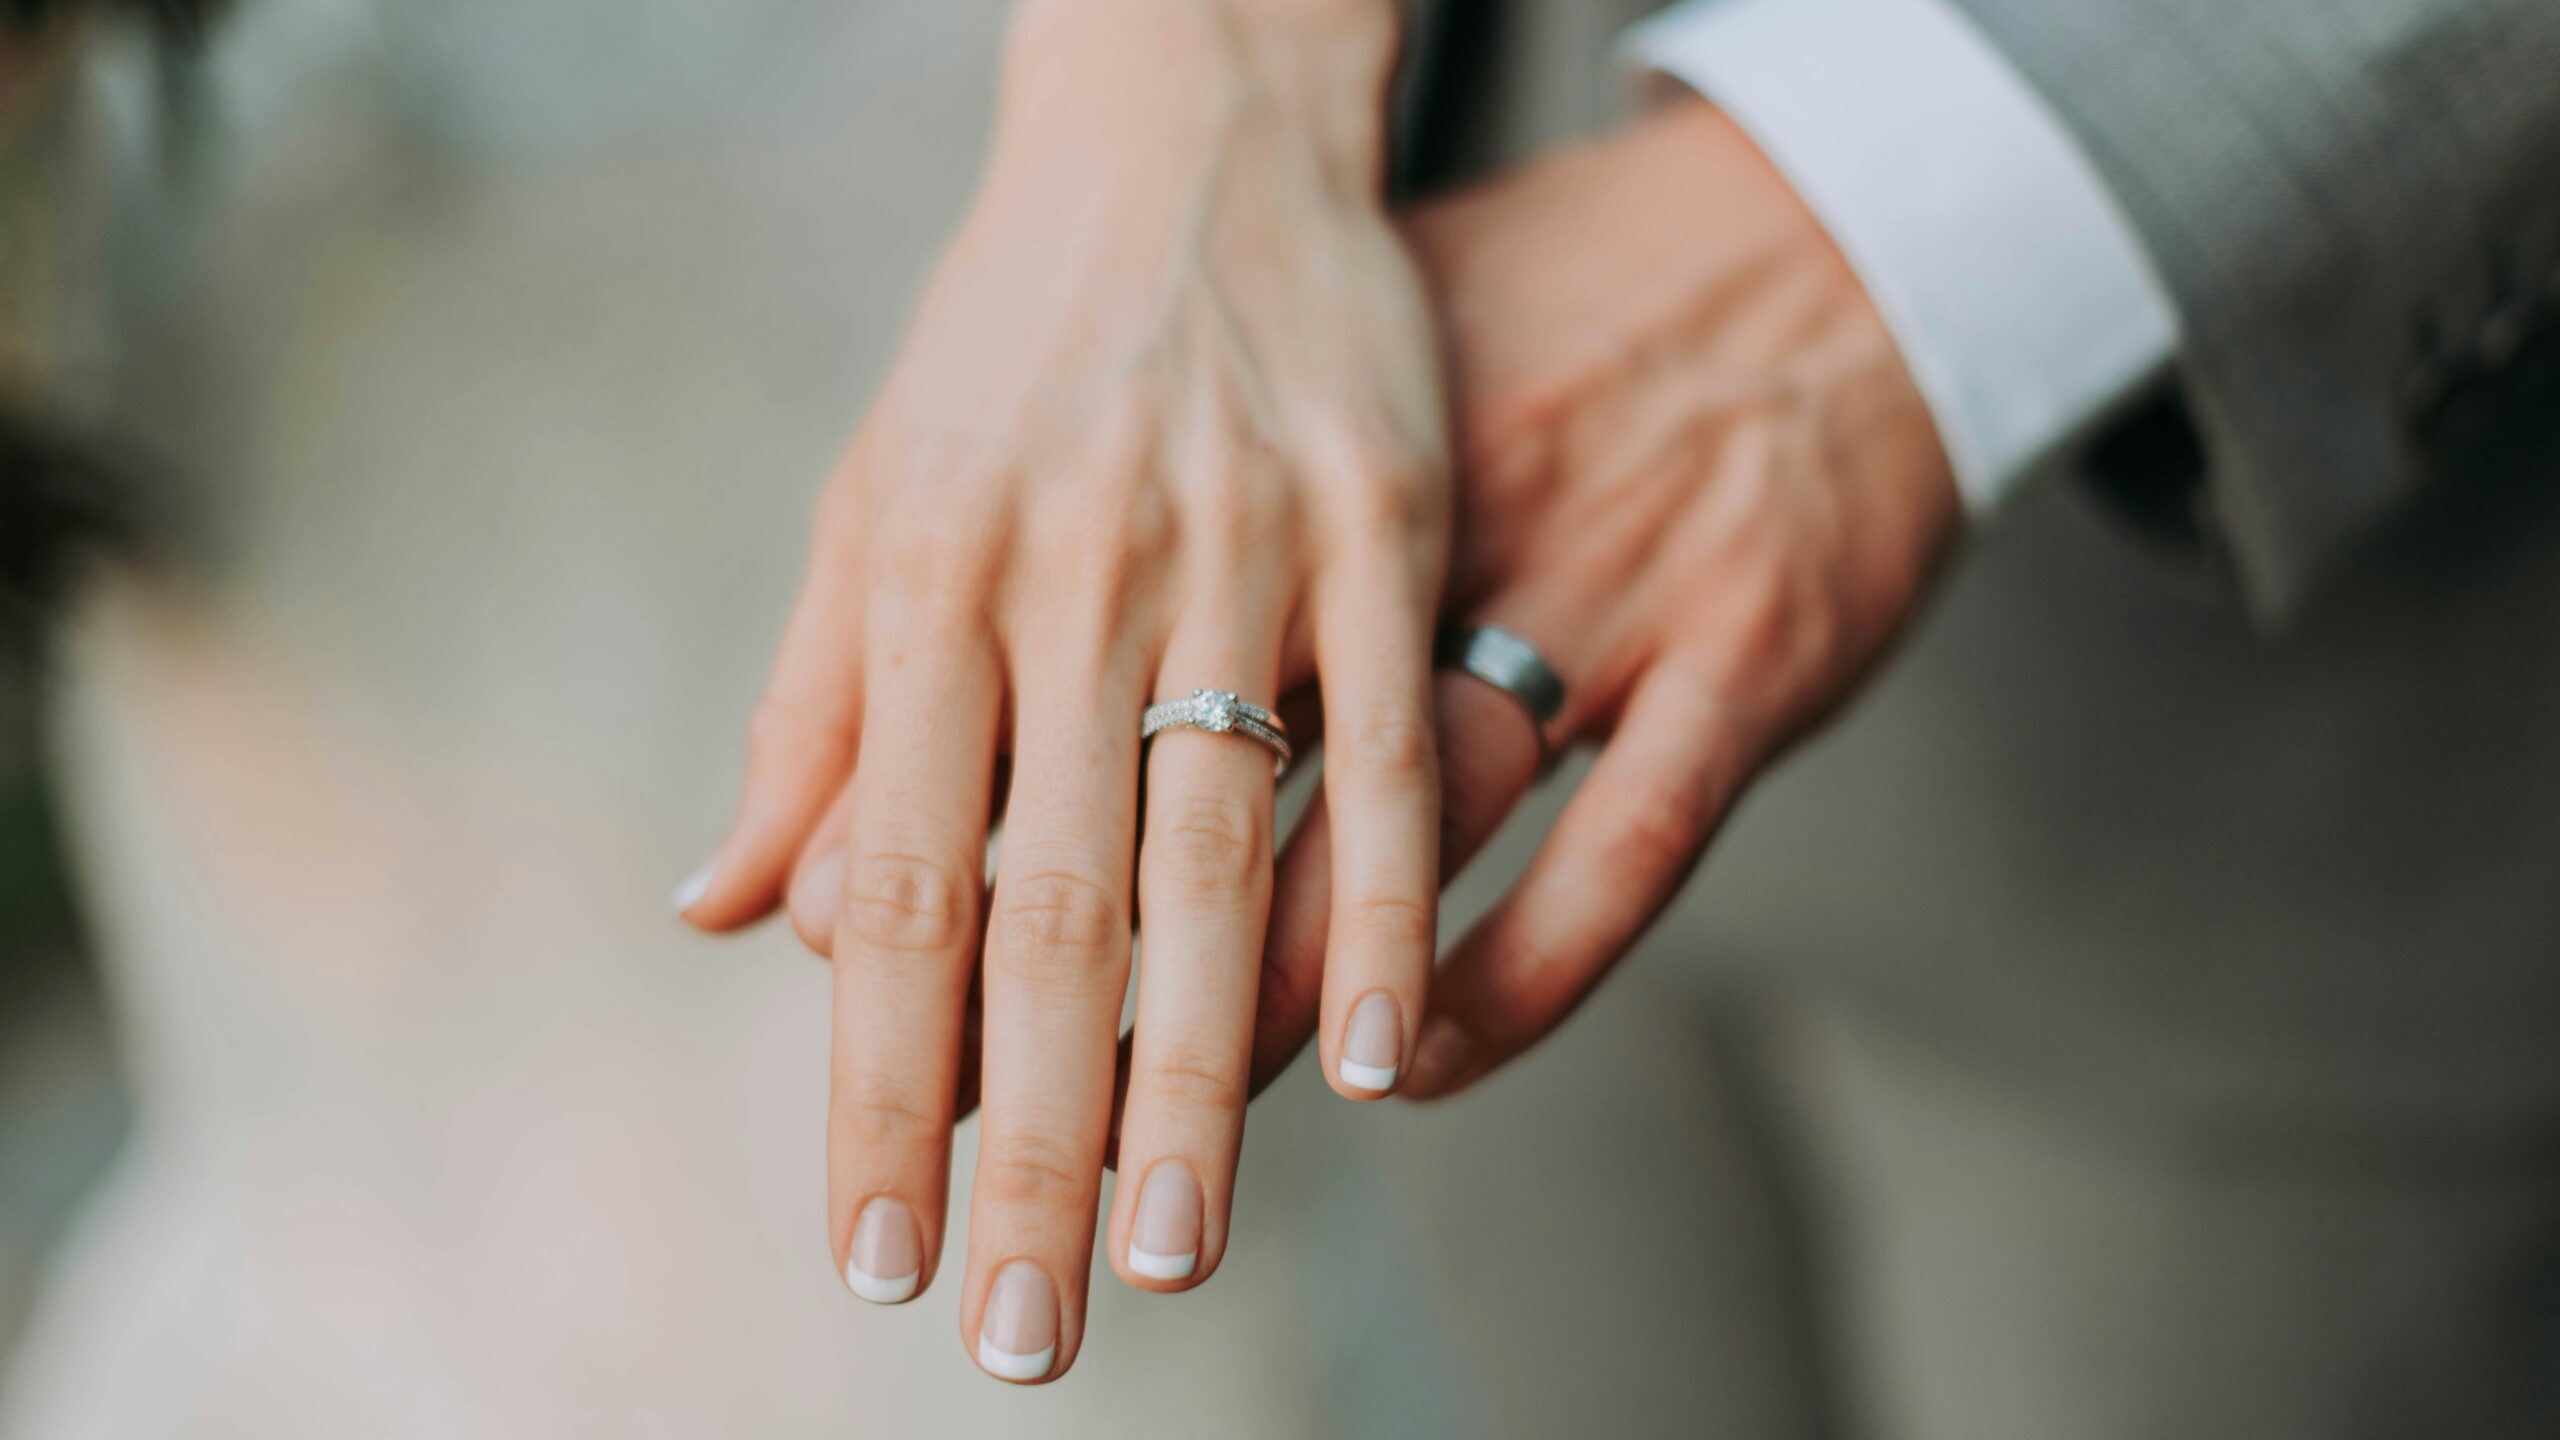 Man and wife holding out hands with their wedding bands